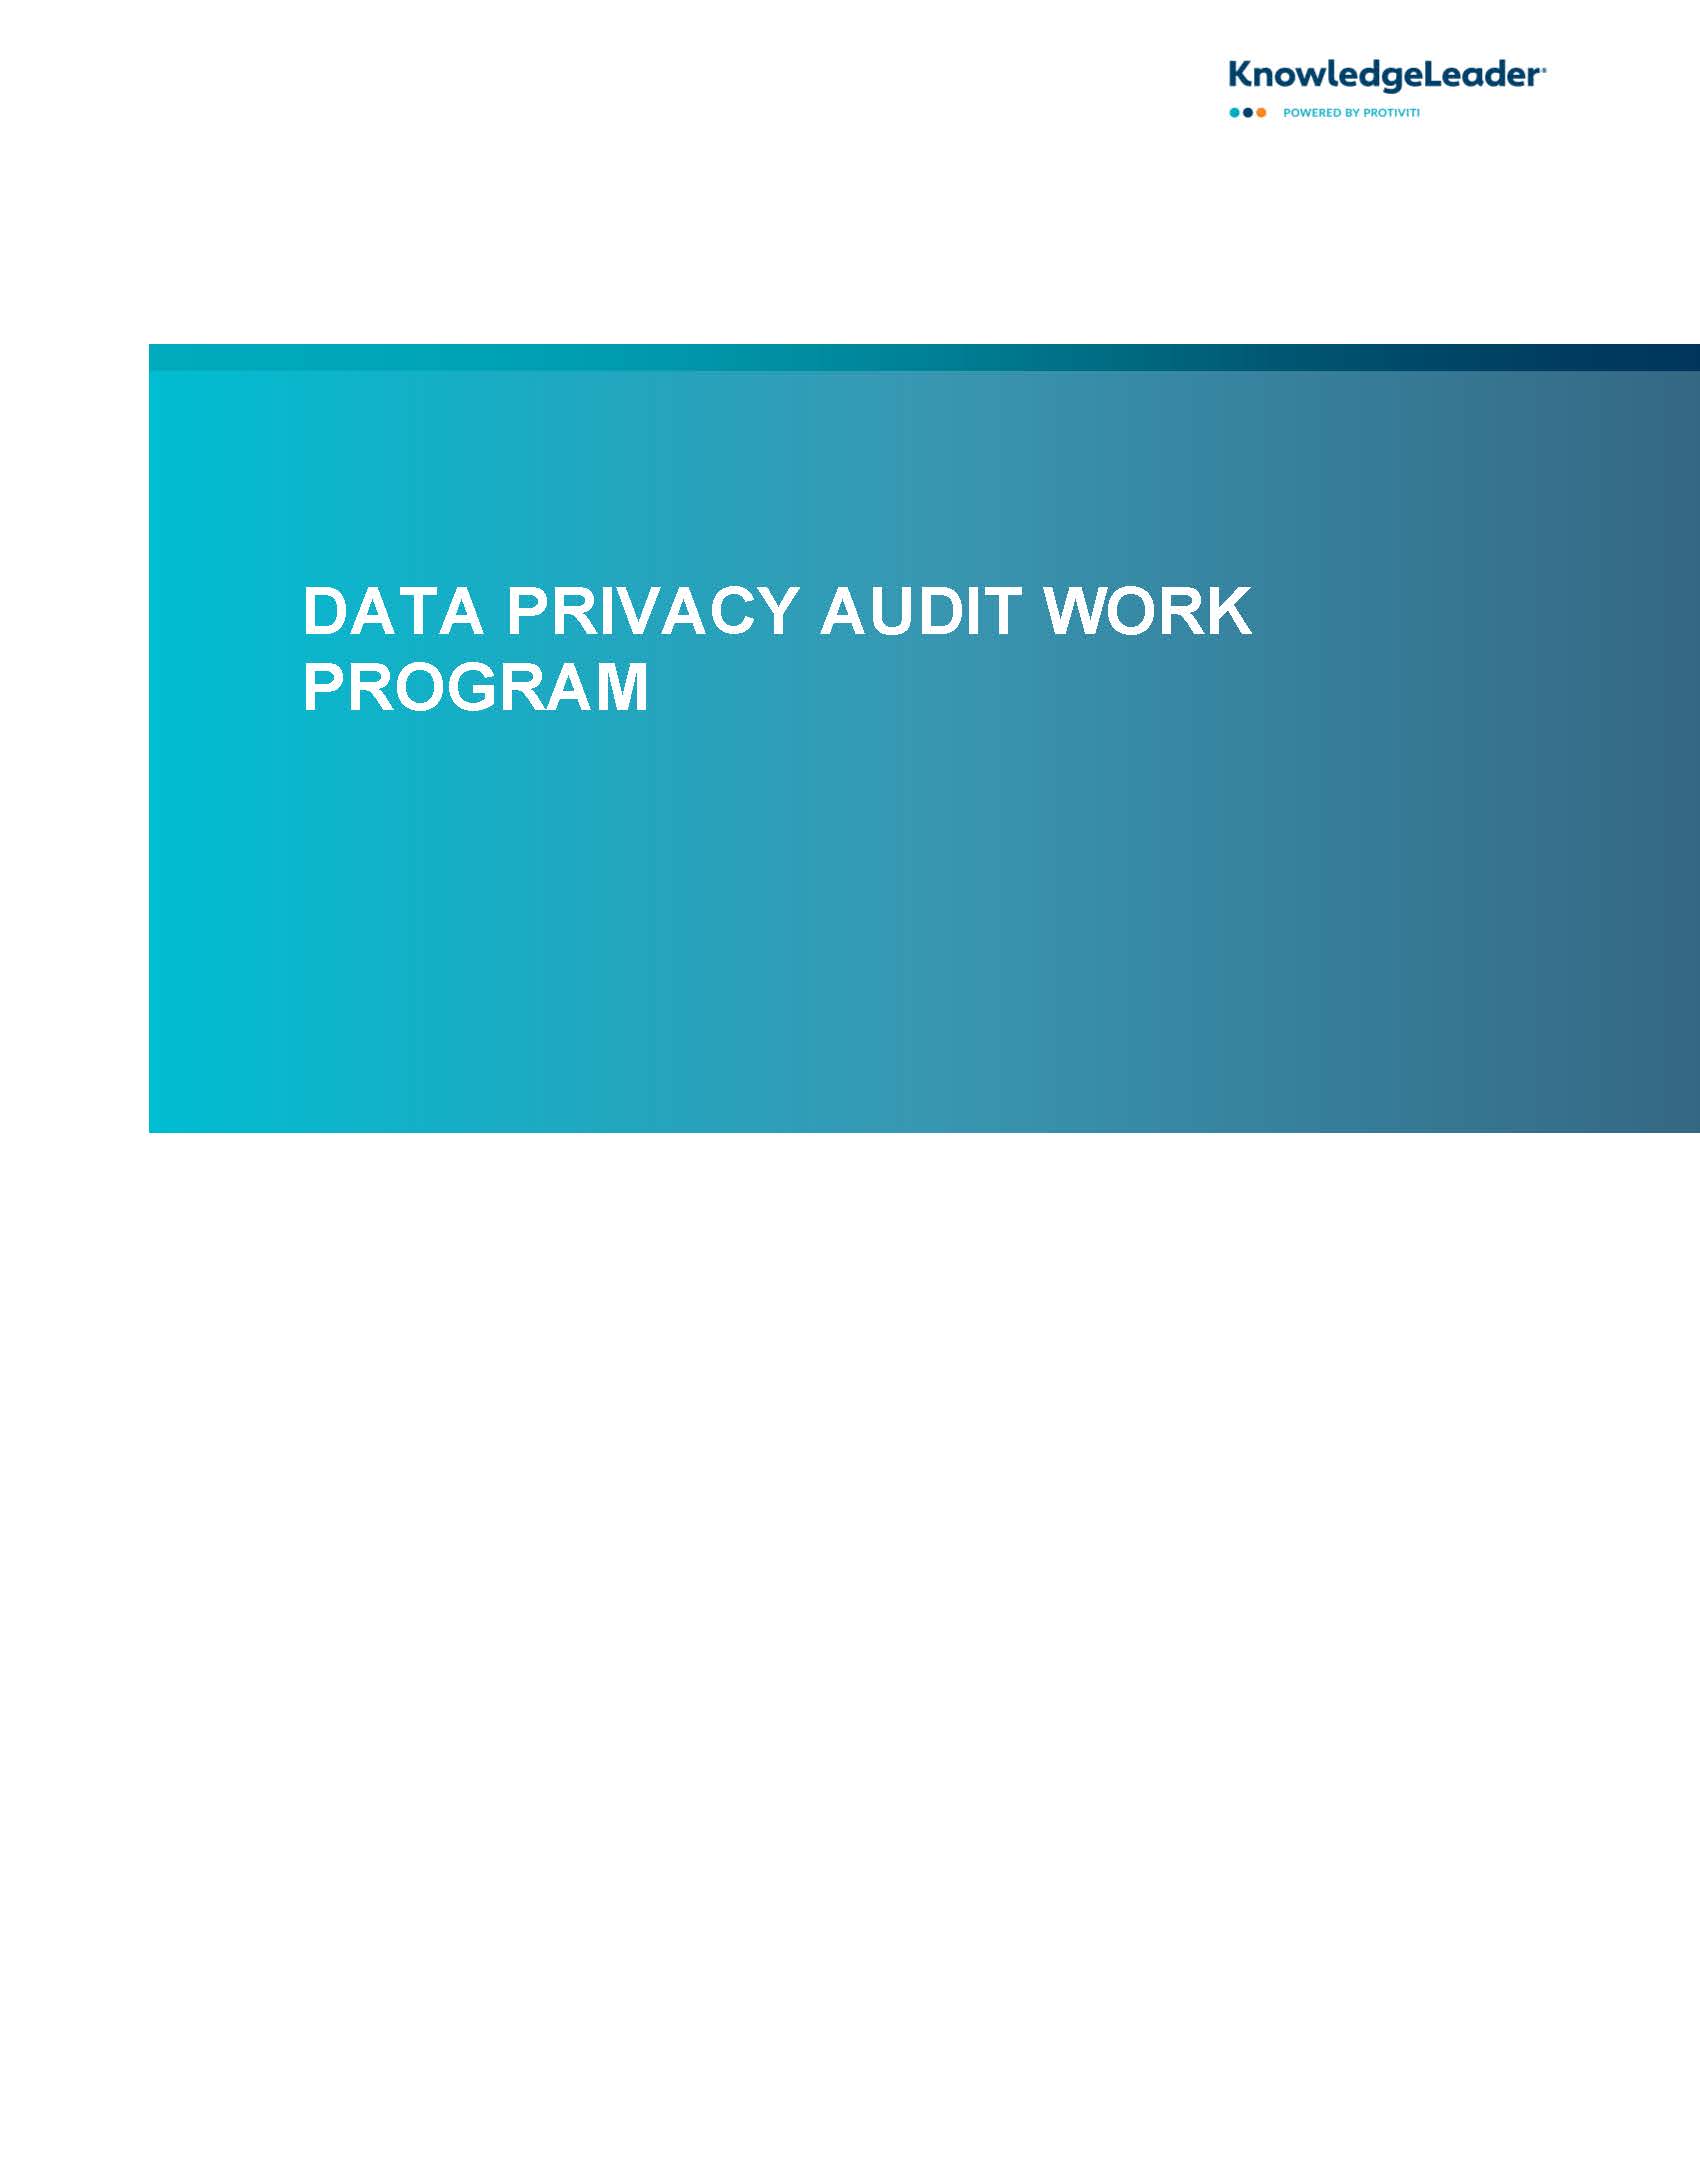 Screenshot of the first page of Data Privacy Audit Work Program